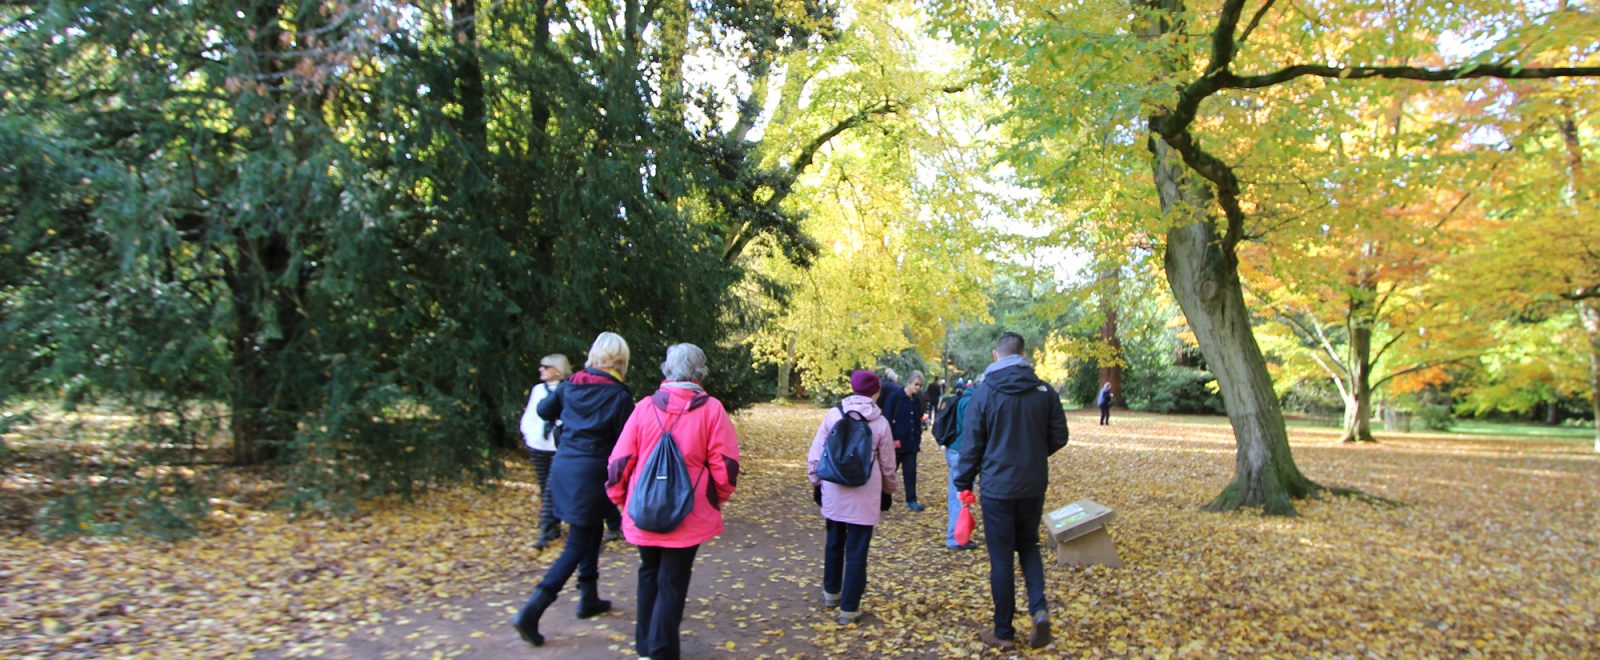 Community group walking in a park.